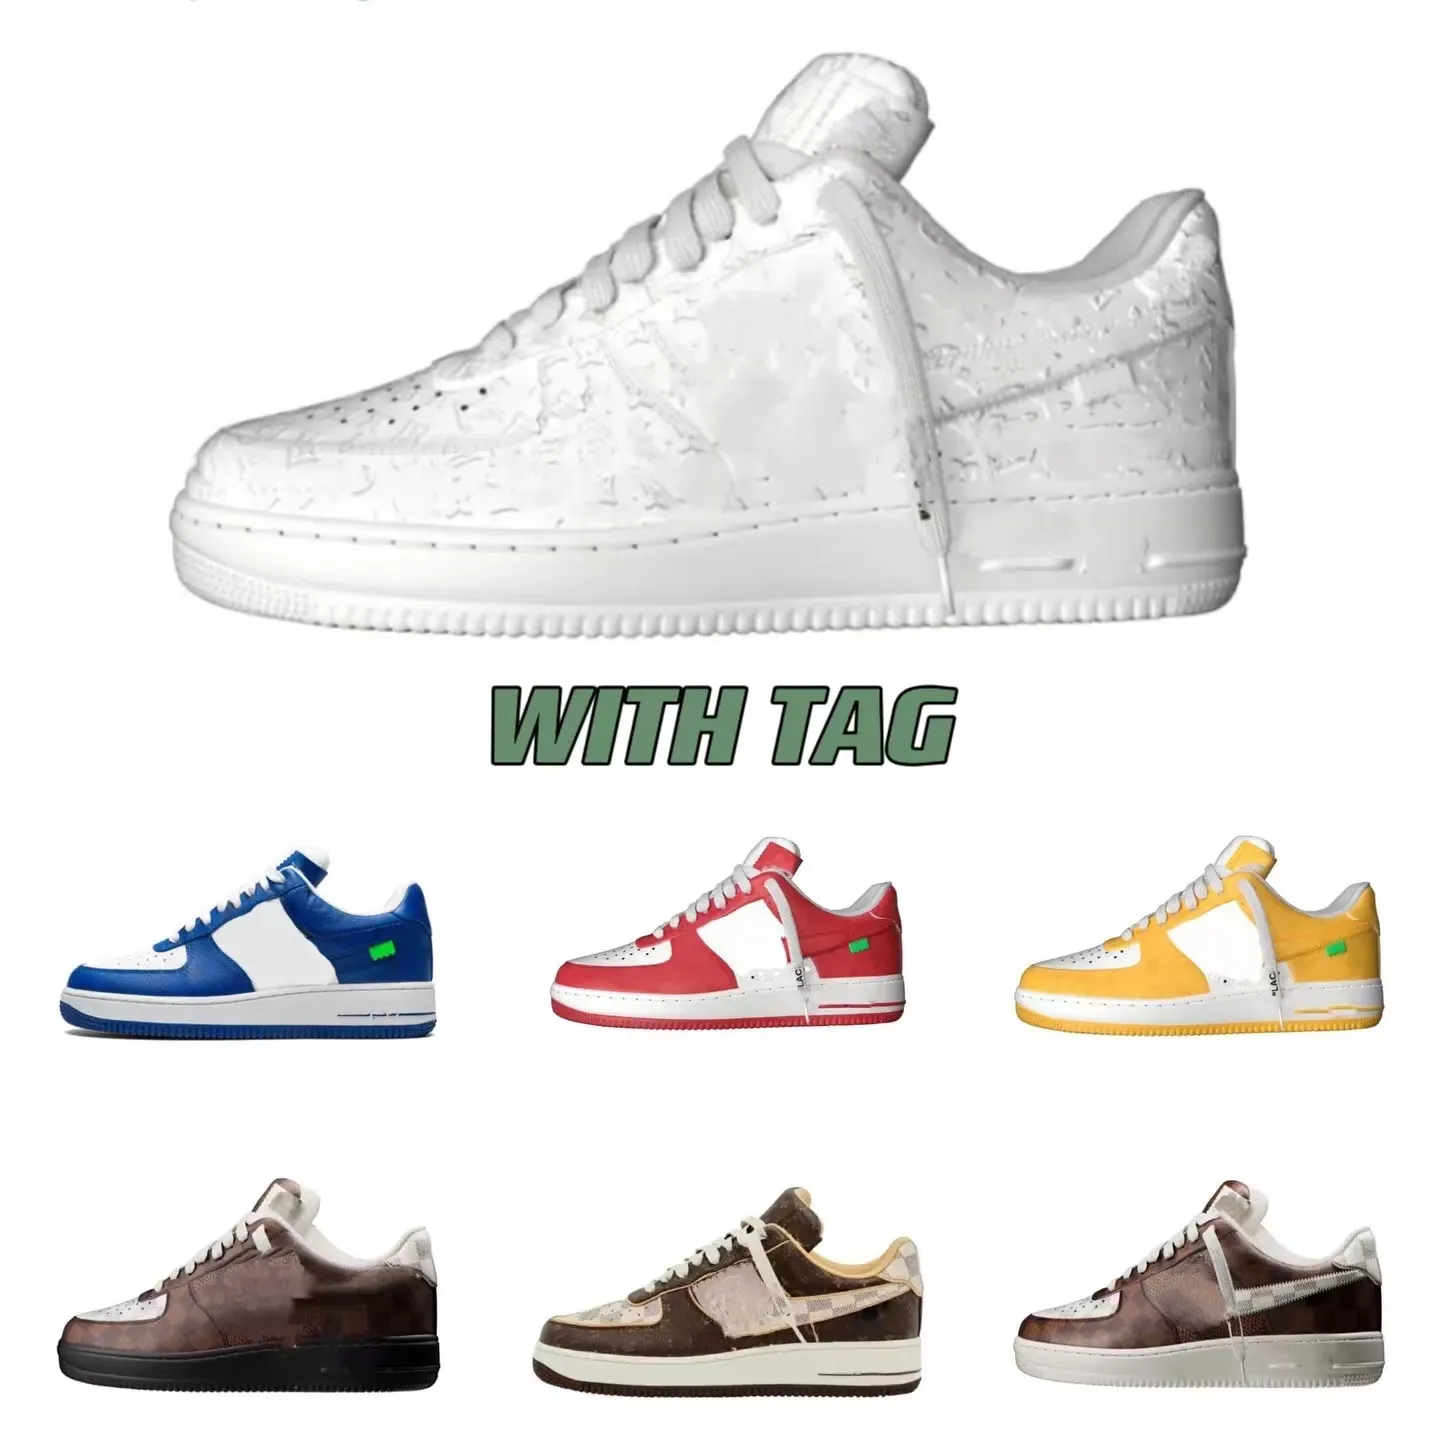 Only high top casual shoes with the highest quality can be made of the highest quality materials with a variety of colors 1 1 dupe1